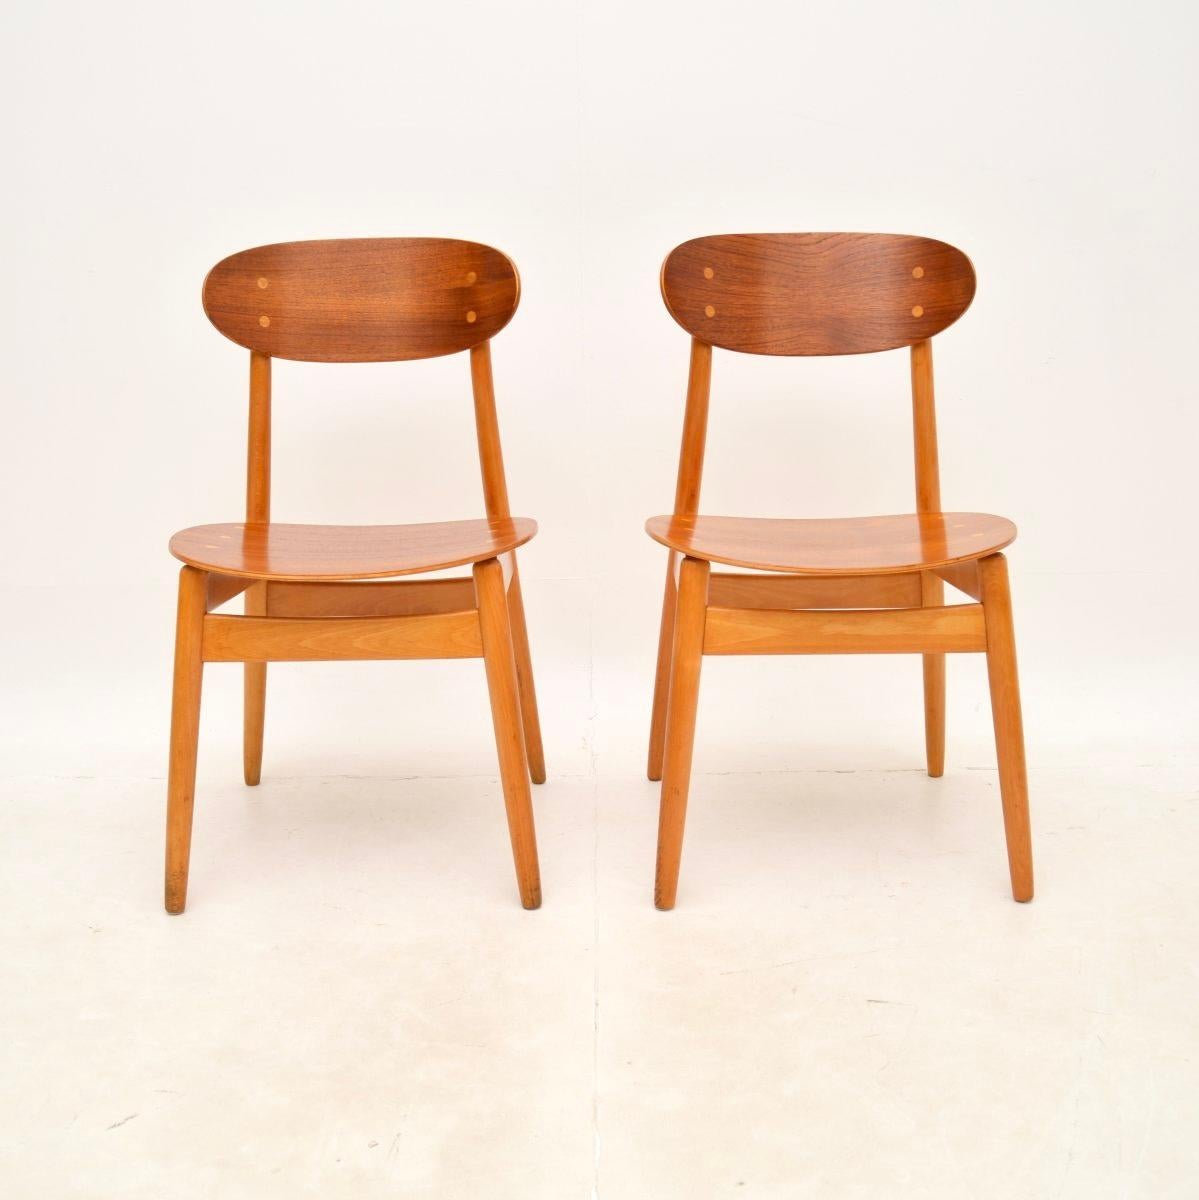 A very stylish and comfortable pair of vintage Swedish dining / side chairs by Sven Erik Fryklund. They were recently imported from Sweden, they were made by Hagafors and date from the 1960’s.

The quality is superb, they are beautifully designed